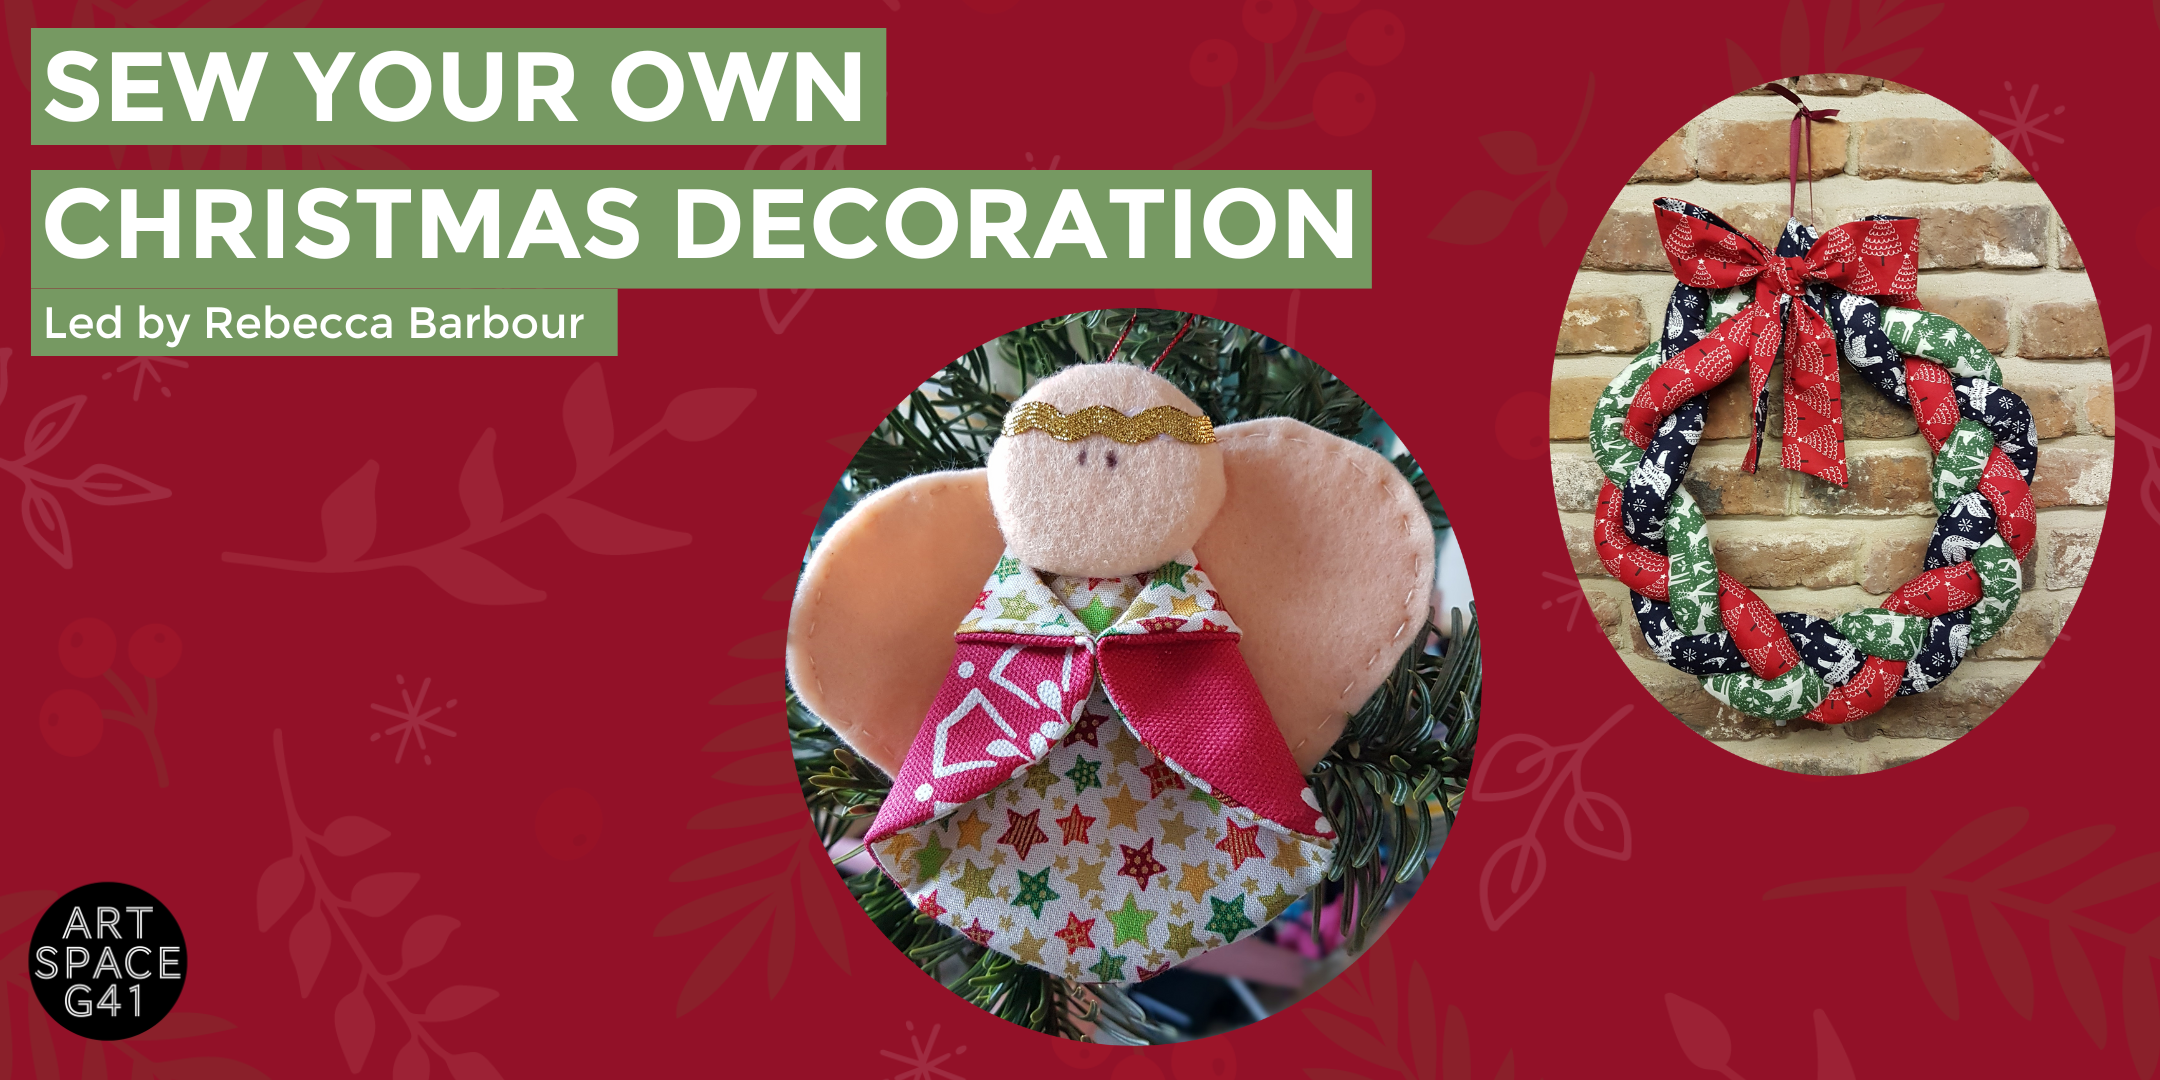 Sew Your Own Christmas Decoration